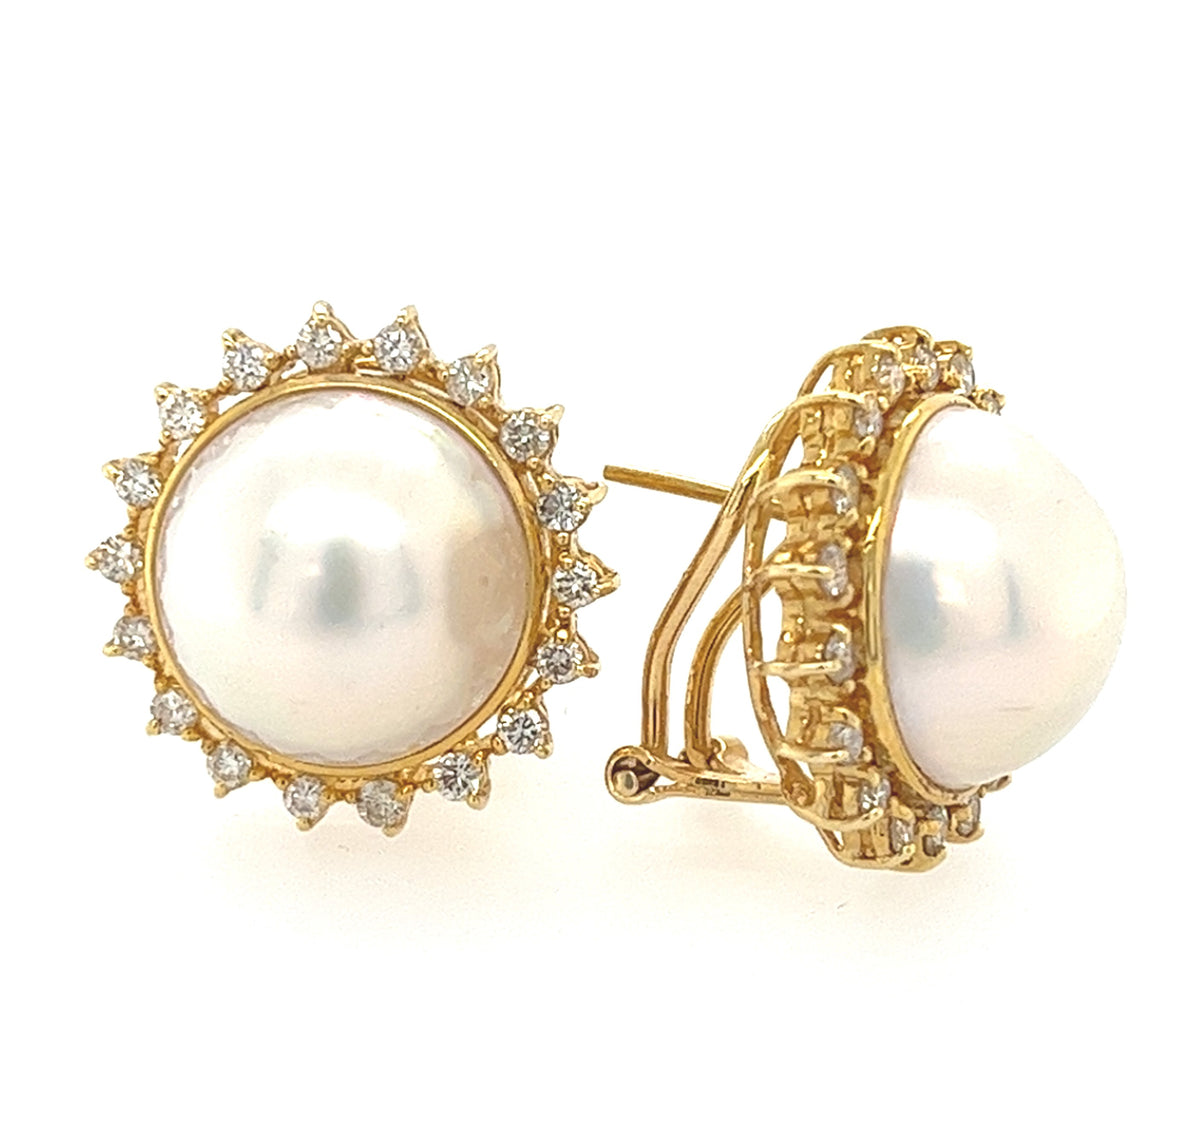 14KT YELLOW GOLD DIAMOND AND PEARL EARRINGS